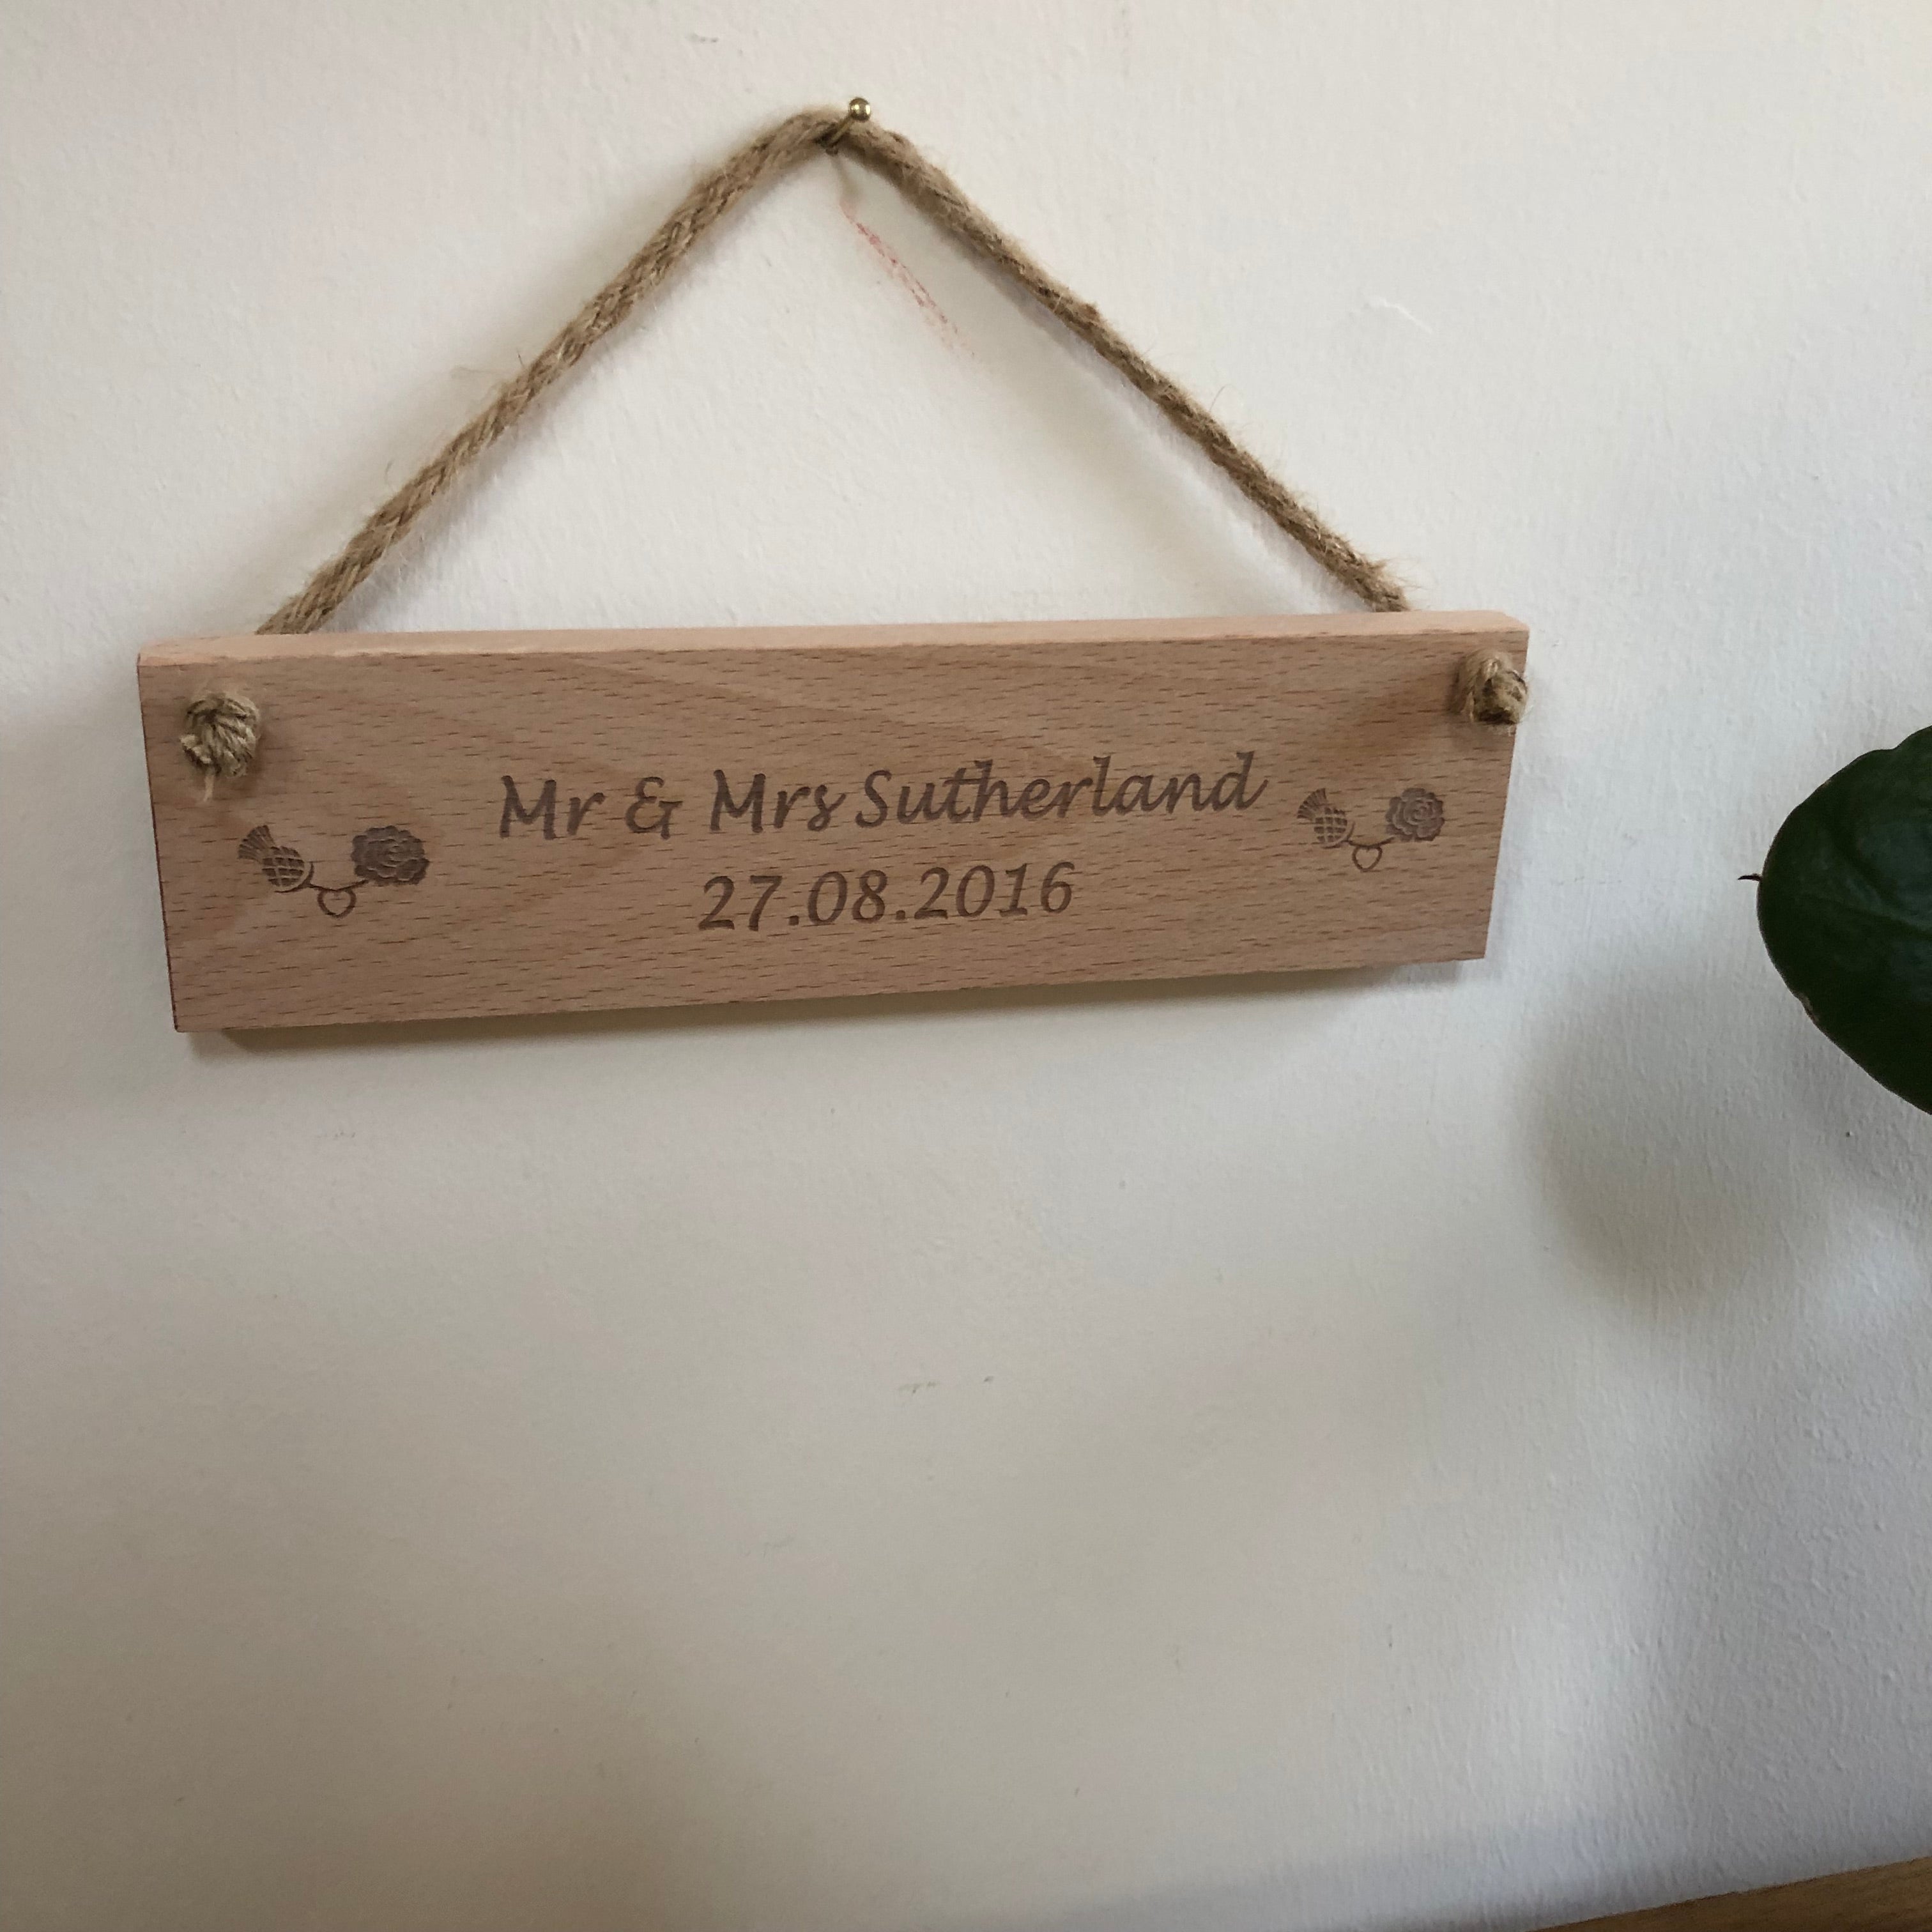 Personalised wedding plaque - names and date with thistle and rose symbols